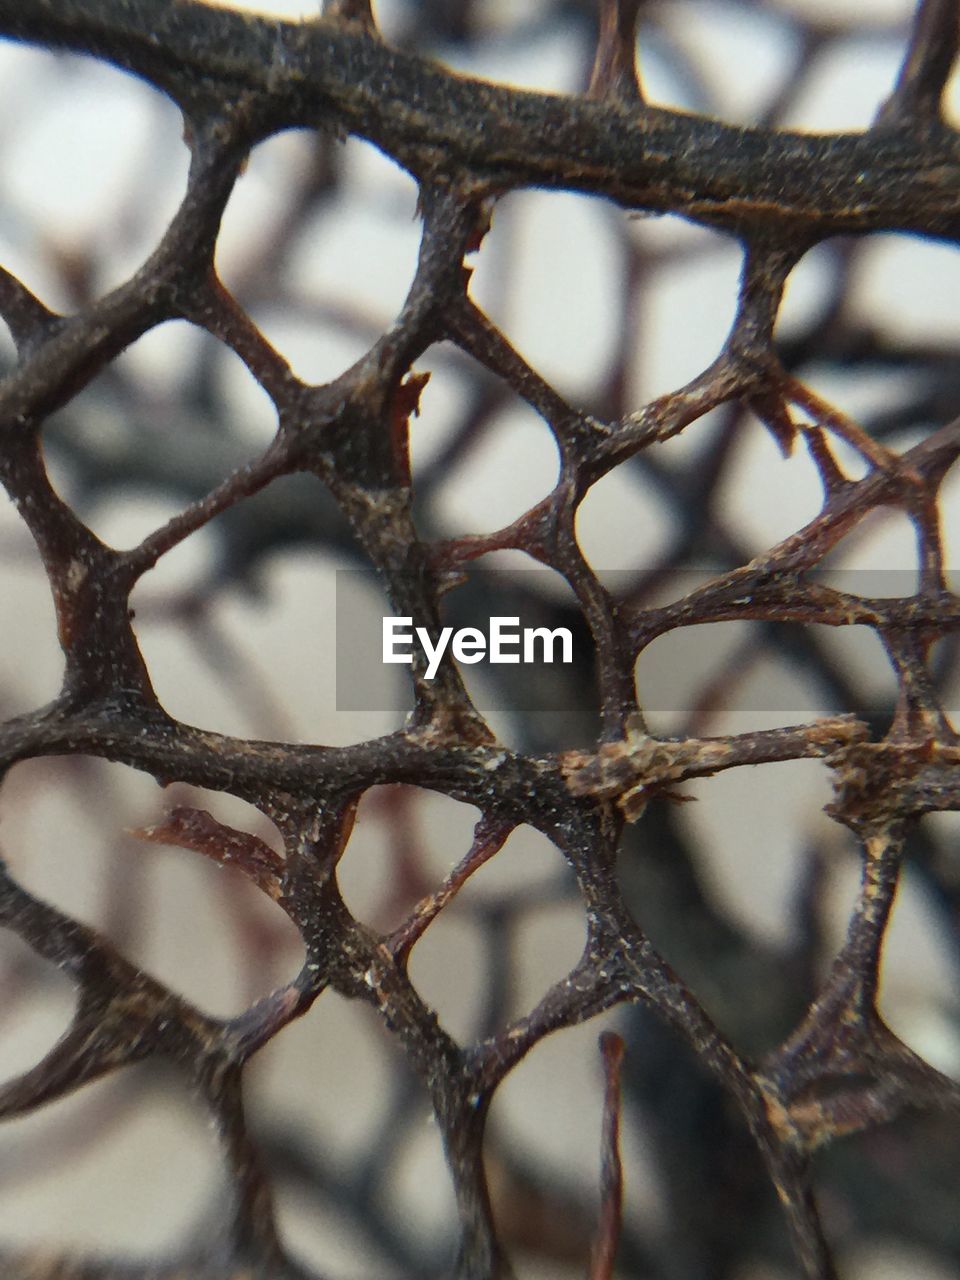 CLOSE-UP OF CHAINLINK FENCE